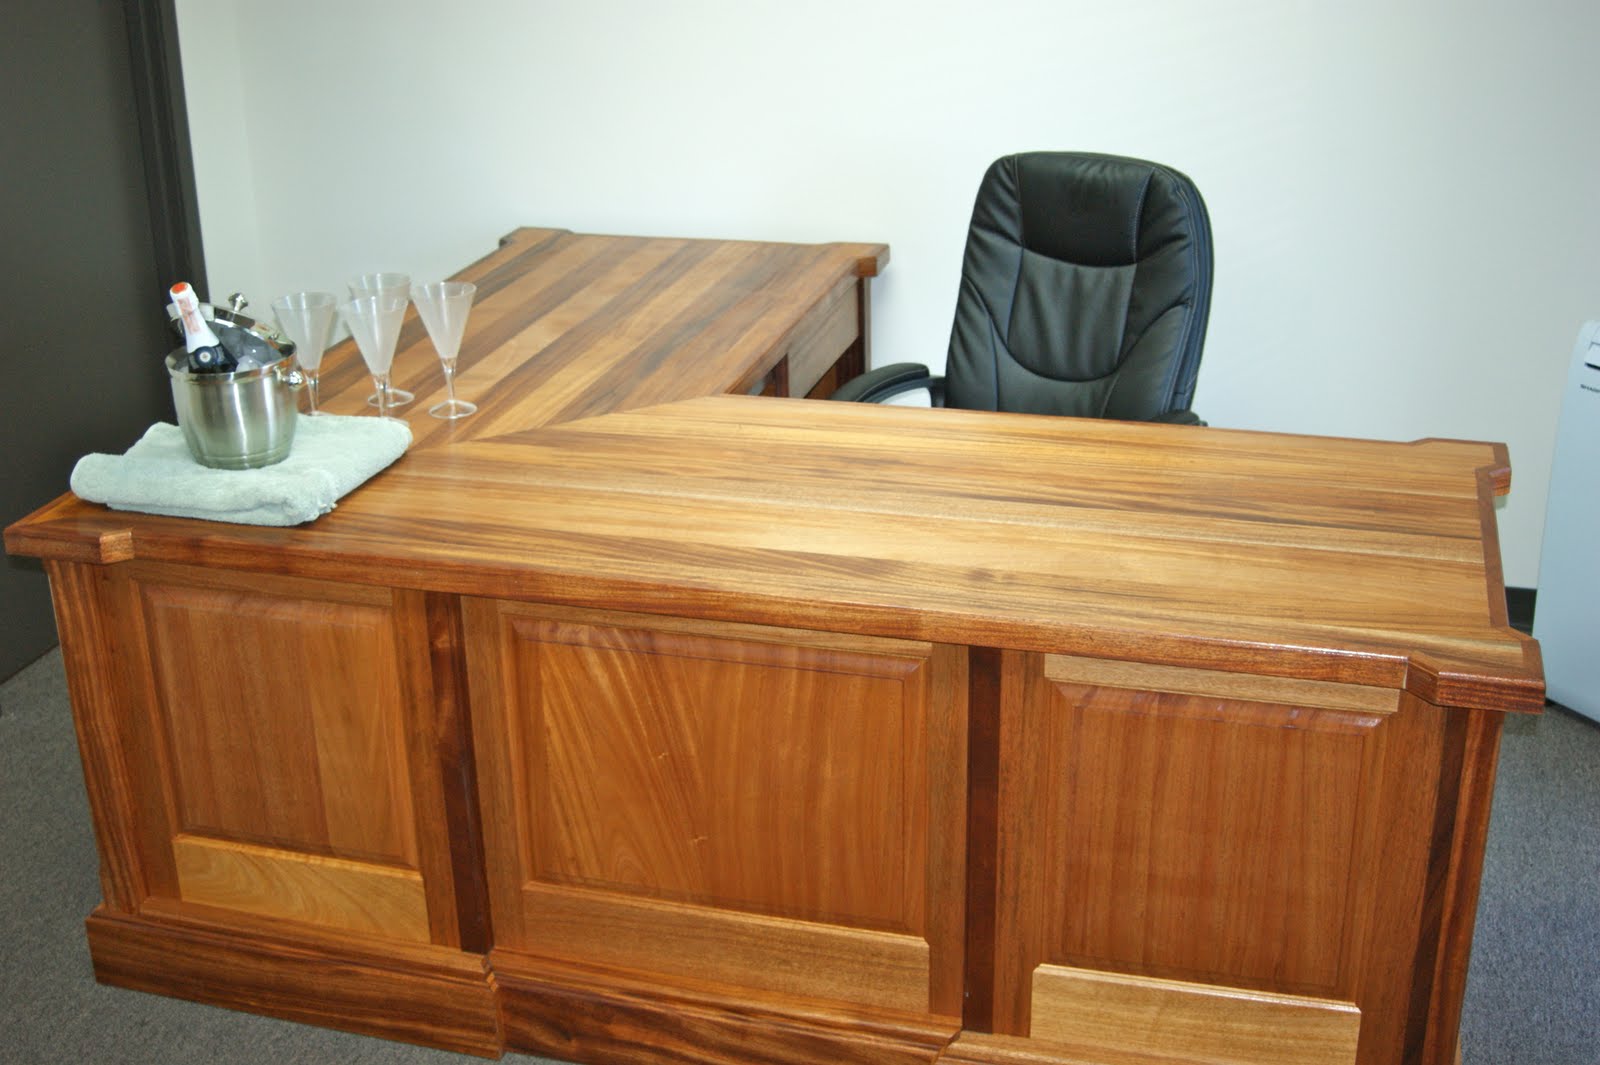 Connecting Relevance: African Mahogany Desk